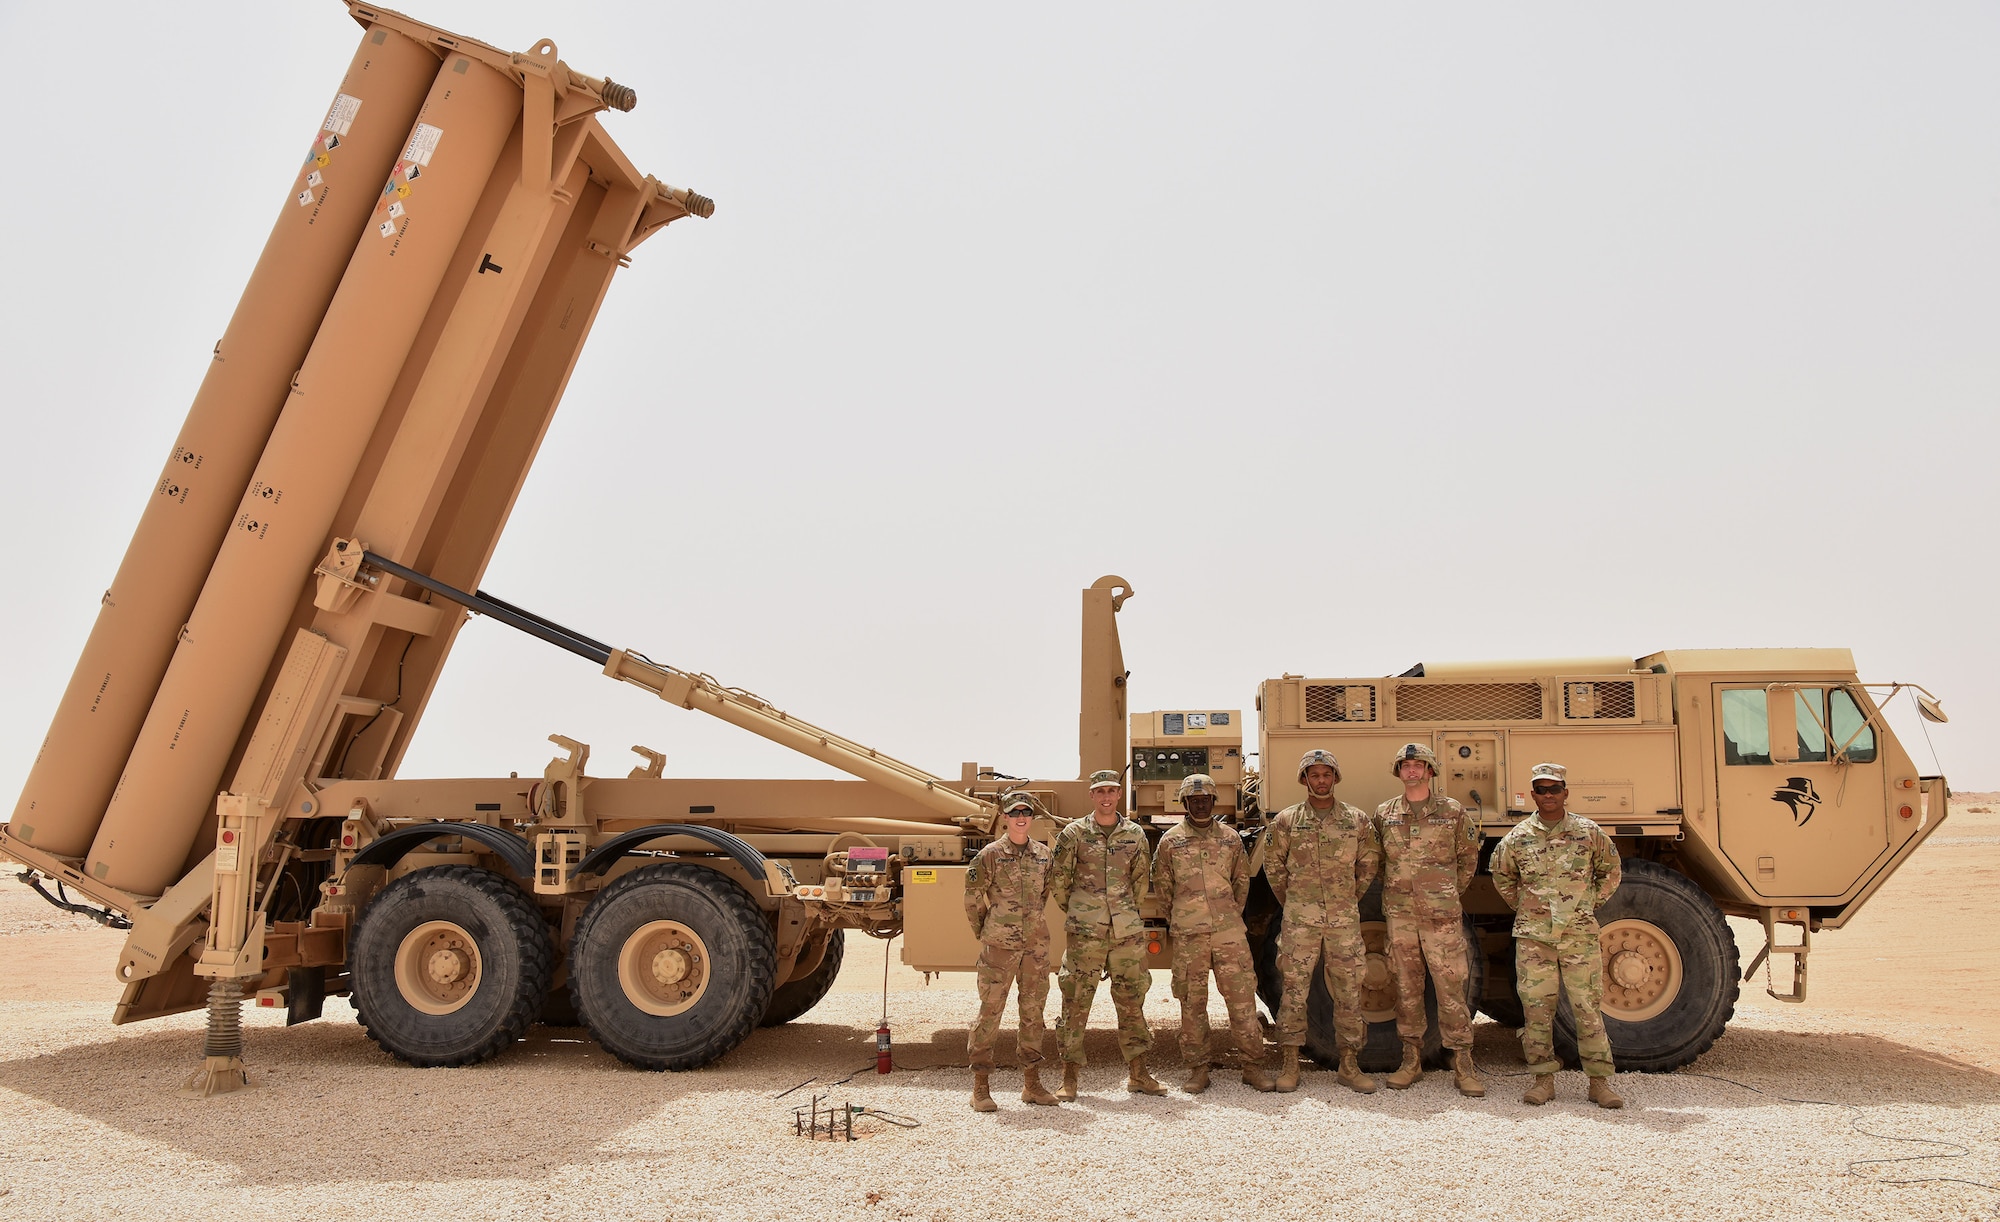 S. Army Soldiers from Bravo Battery, 2nd Air Defense Artillery Regiment system checks a Terminal High Altitude Area Defense (THAAD) launcher during routine start up procedures in the U.S. Central Command’s area of responsibility.